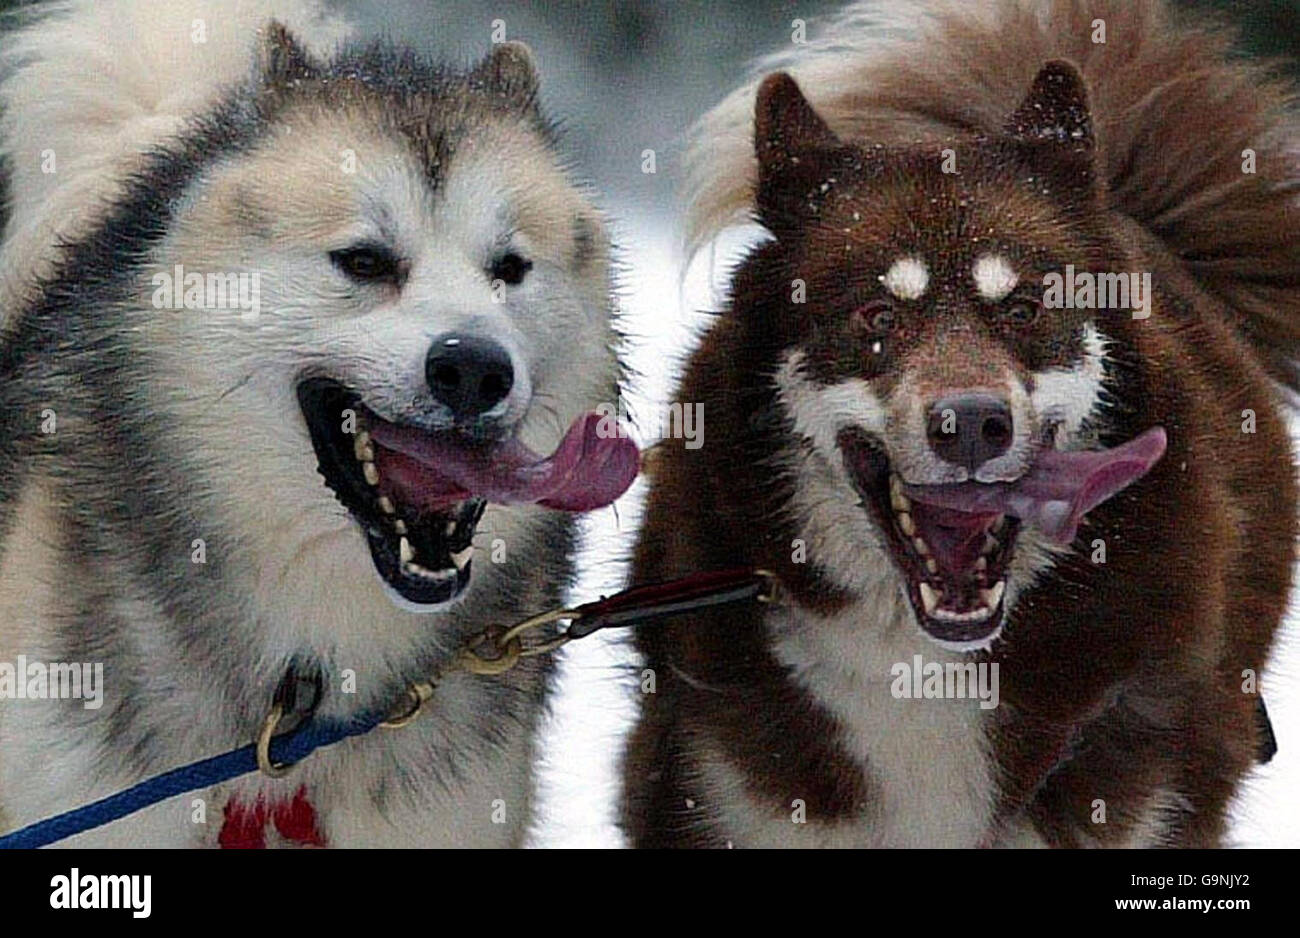 Mushers from throughout the UK gather in the forests around Aviemore for the biggest event in the British husky calendar - the Arden Grange & Siberian Husky Club of GB Aviemore Sled Dog Rally. Stock Photo